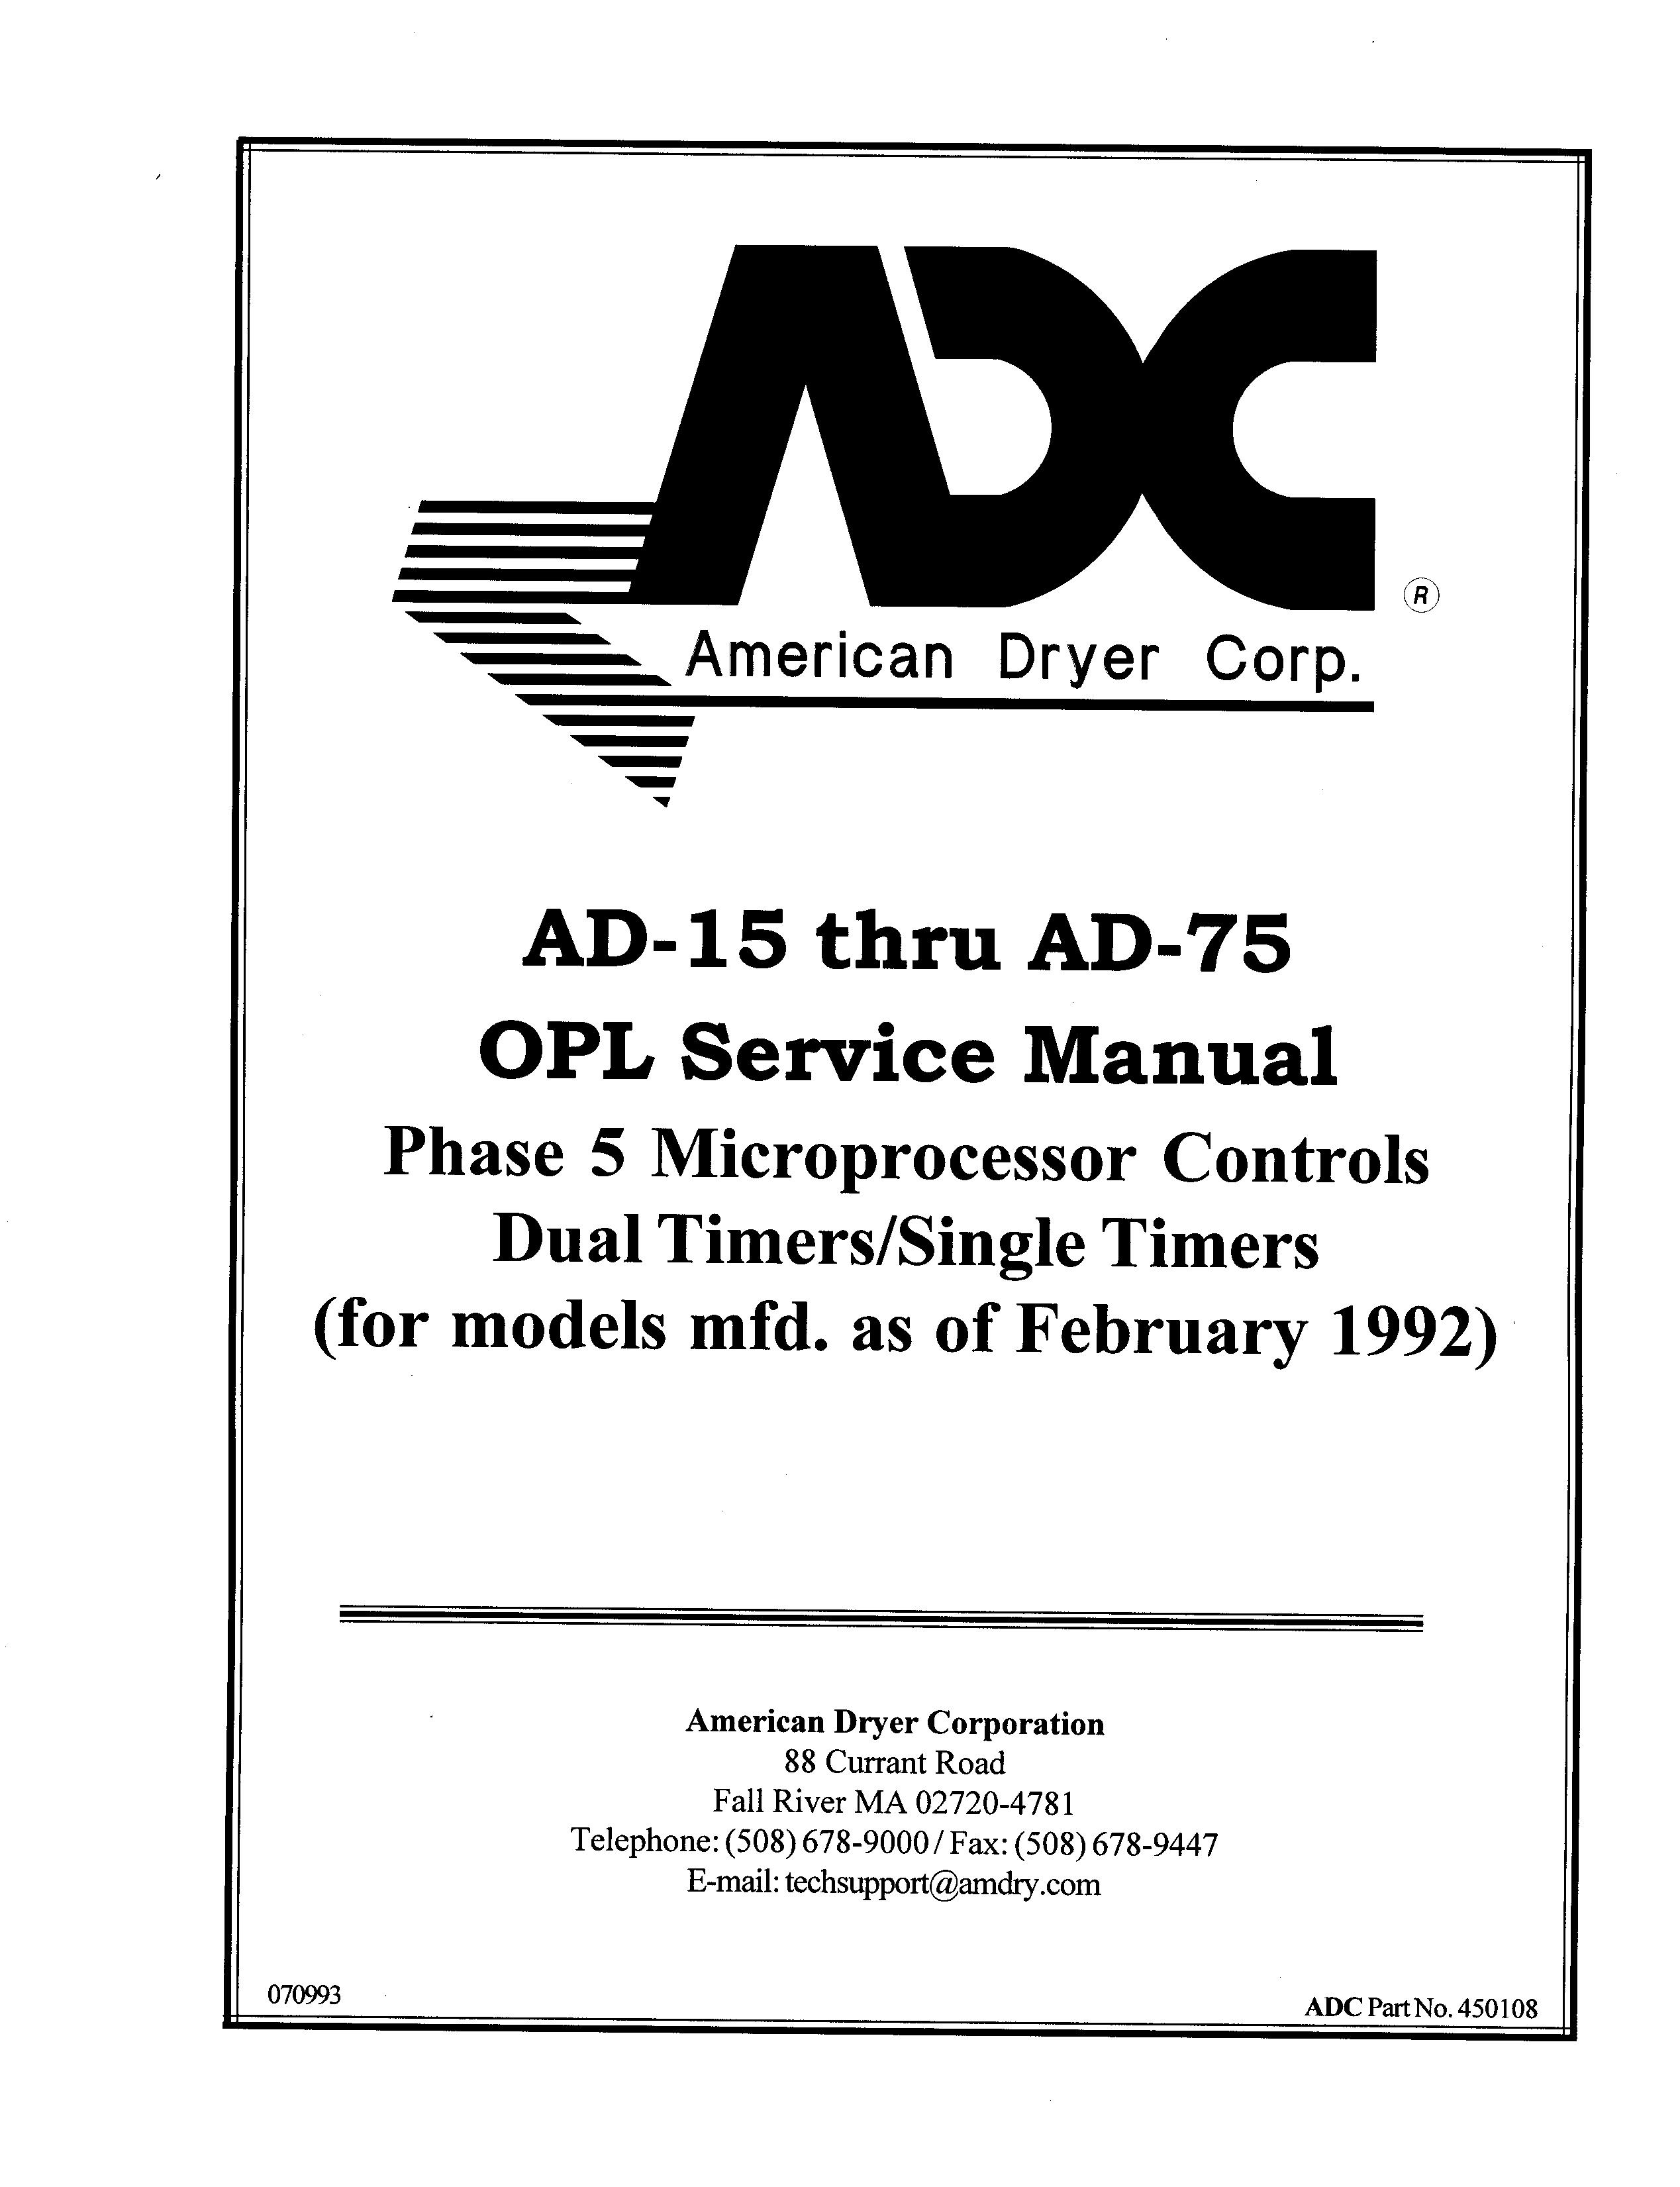 American Dryer Corp. AD-15 thru AD-75 Clothes Dryer User Manual